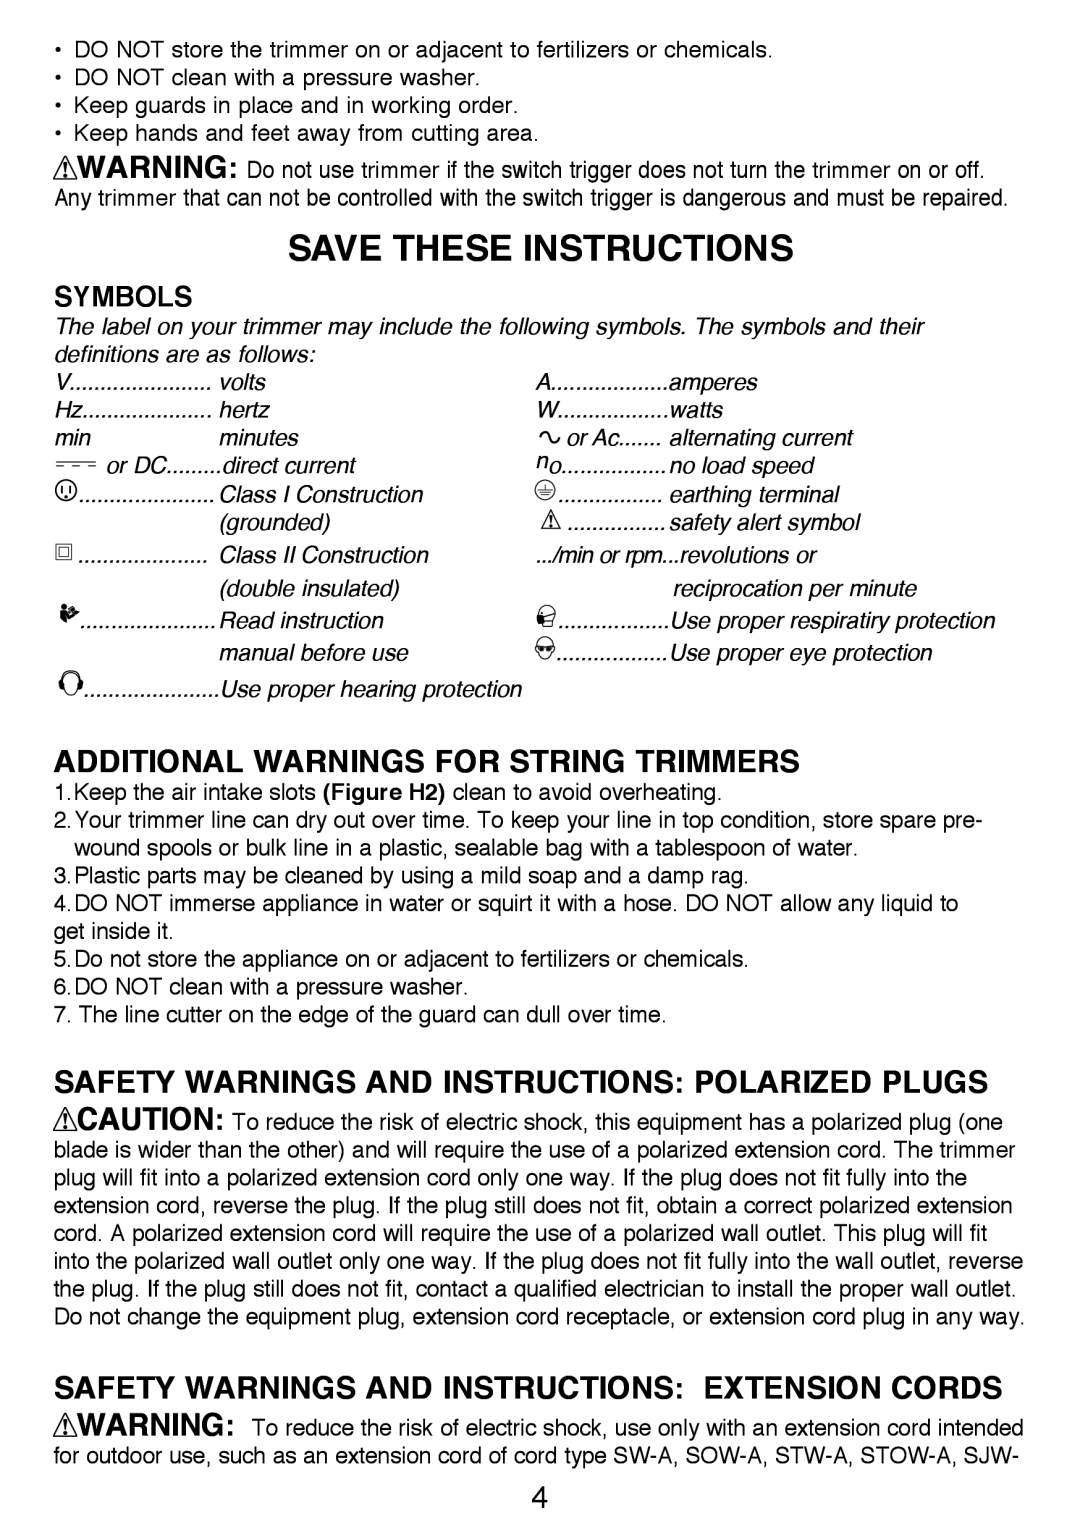 Black & Decker GH3000R instruction manual Save These Instructions, Additional Warnings For String Trimmers, Symbols 